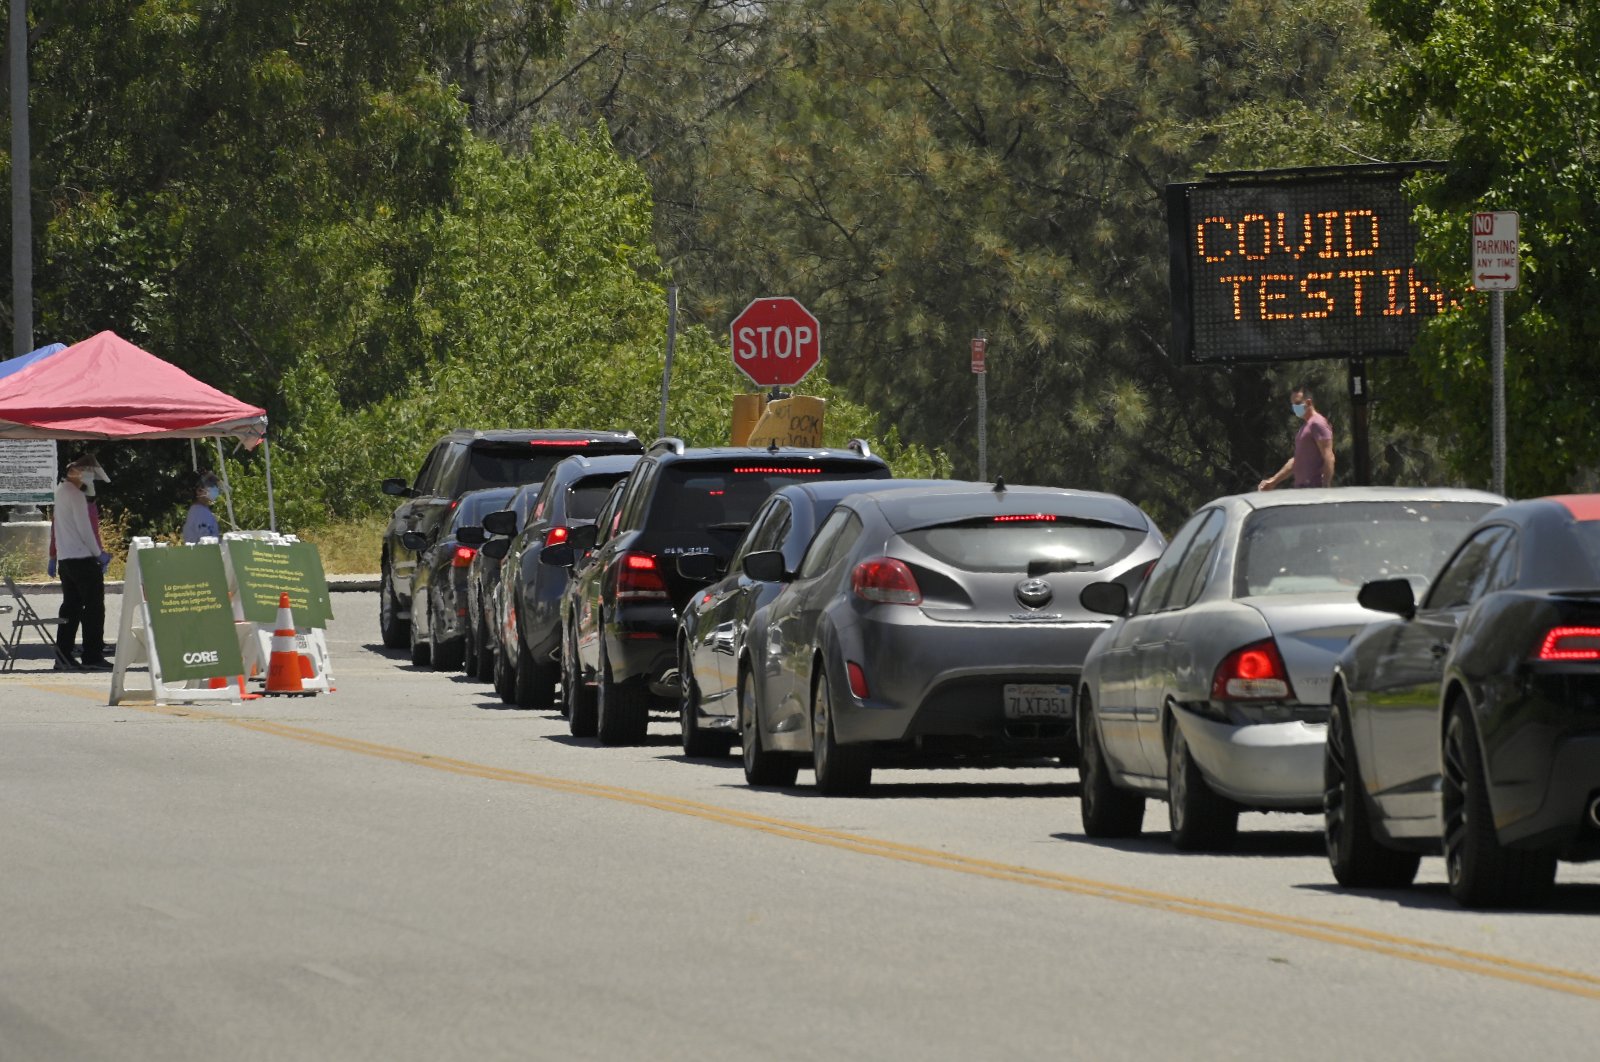 Cars line up for COVID-19 testing at Hansen Dam Recreation Center, Los Angeles. C.A., July 7, 2020. (AP Photo)